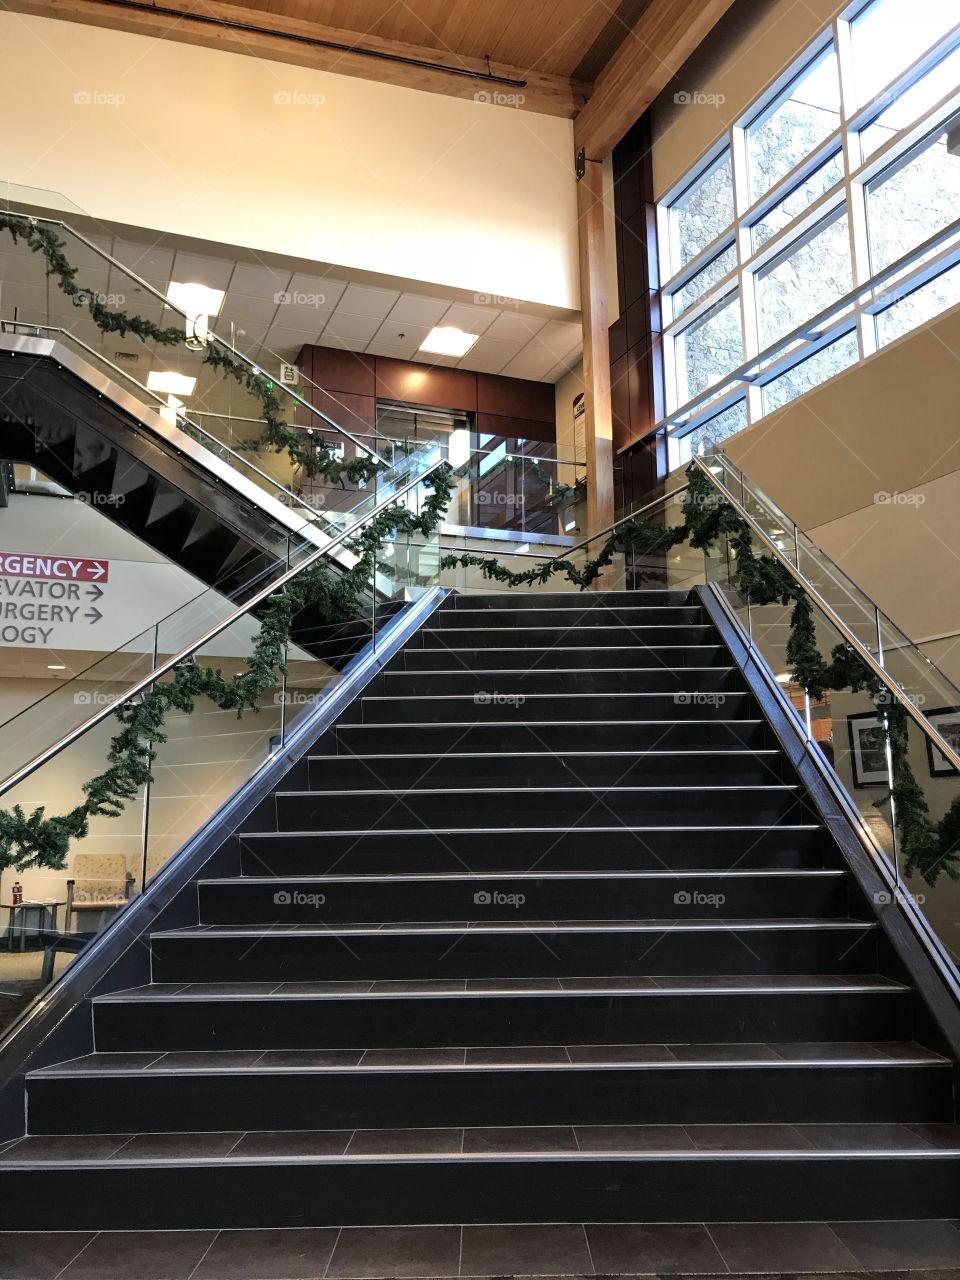 Two levels of stairs decorated in festive garland for the holiday season lead to an upper floor. 